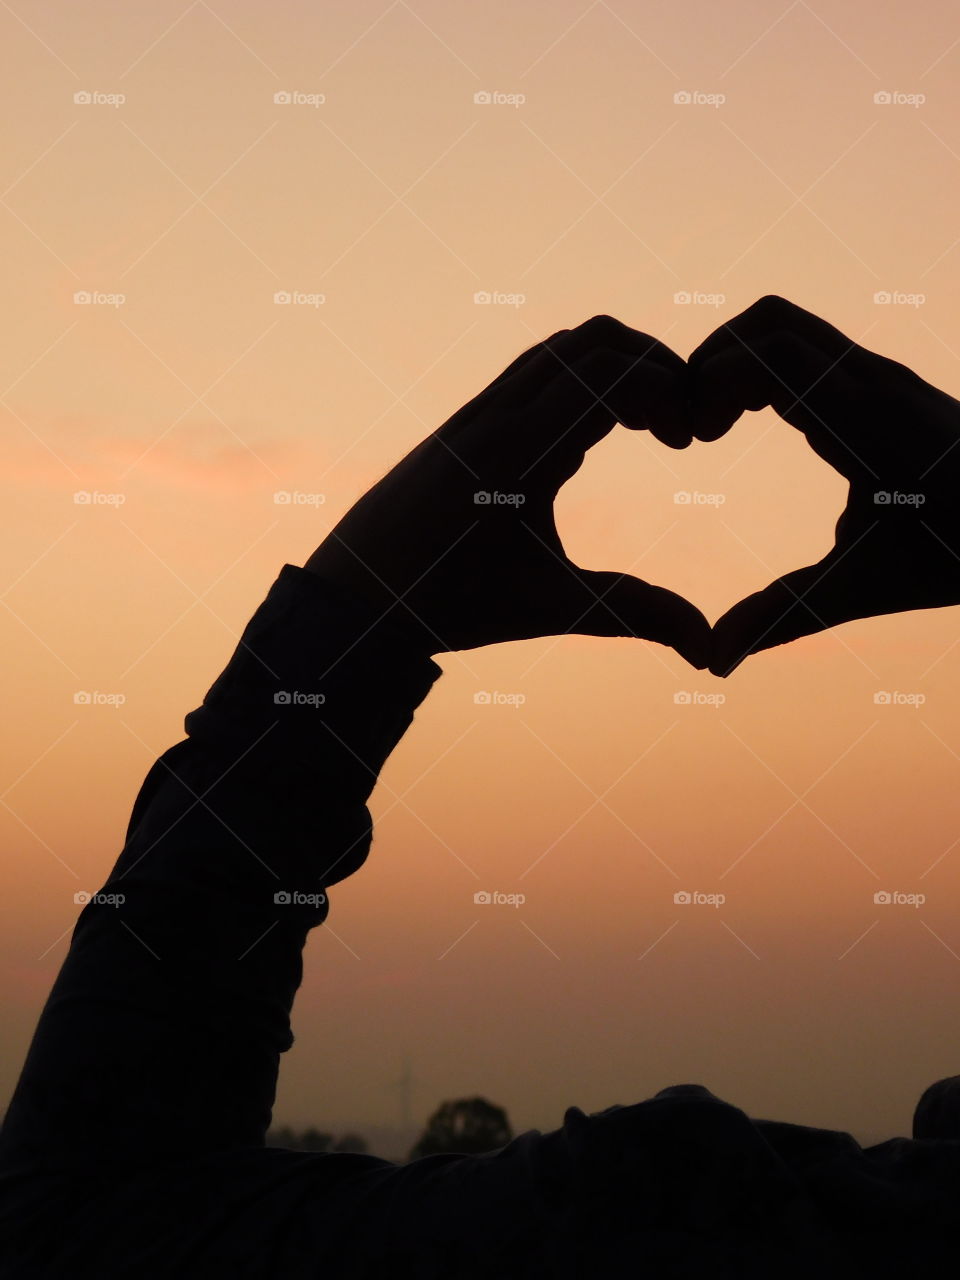 Heart shaped hand posture or love wallpaper with sunset light background.